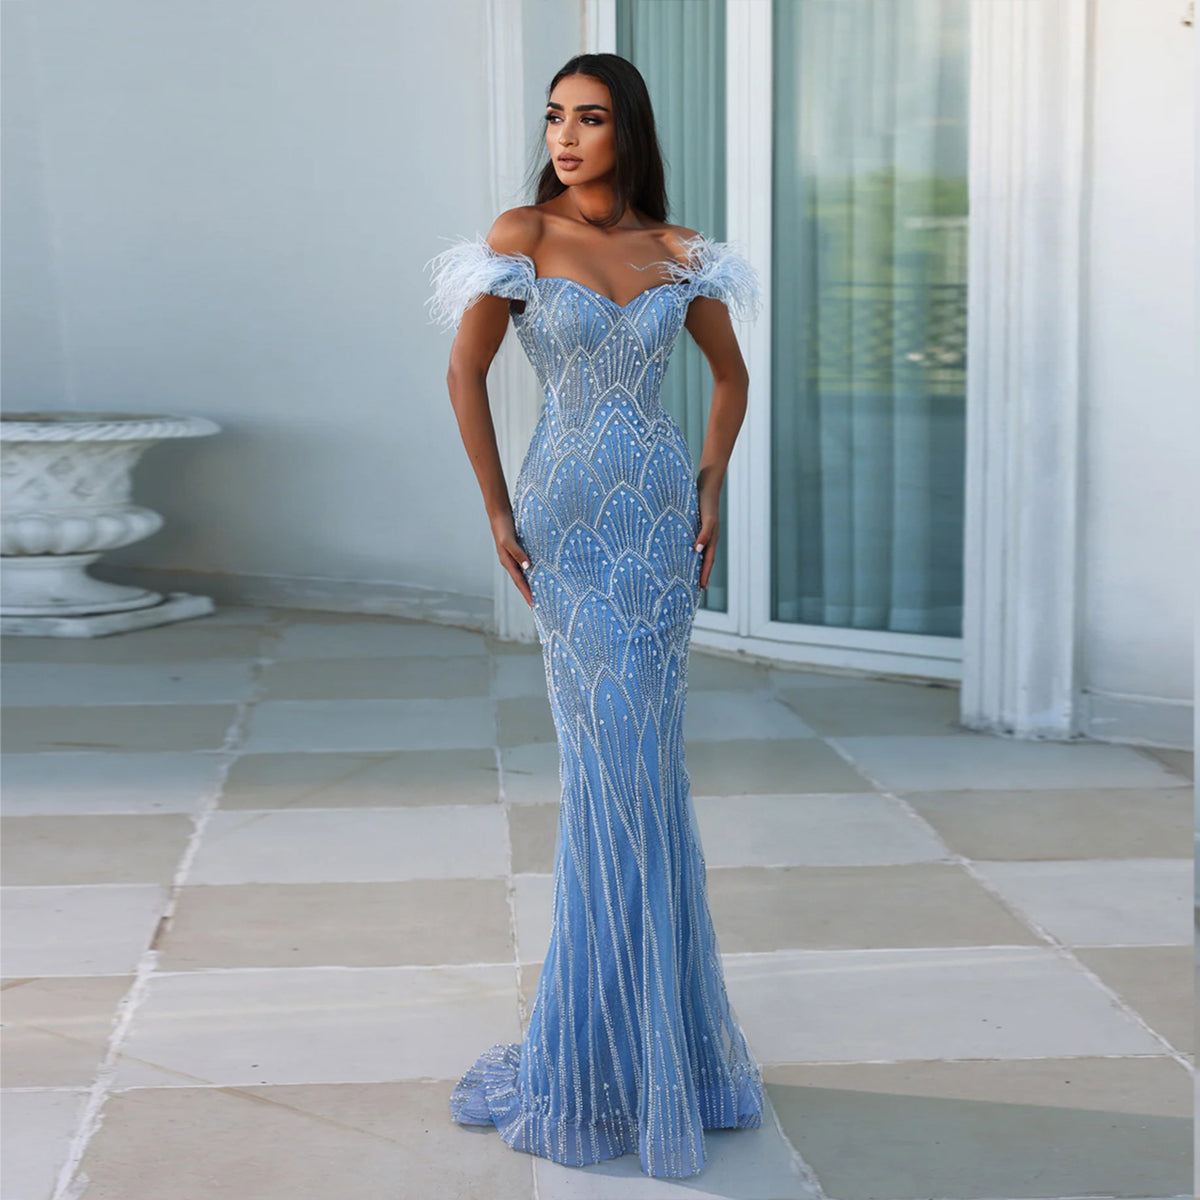 Sharon Said Blue Mermaid Luxury Feathers Evening Dresses for Women Wedding Party Champagne Beaded Long Prom Formal Gowns SS179